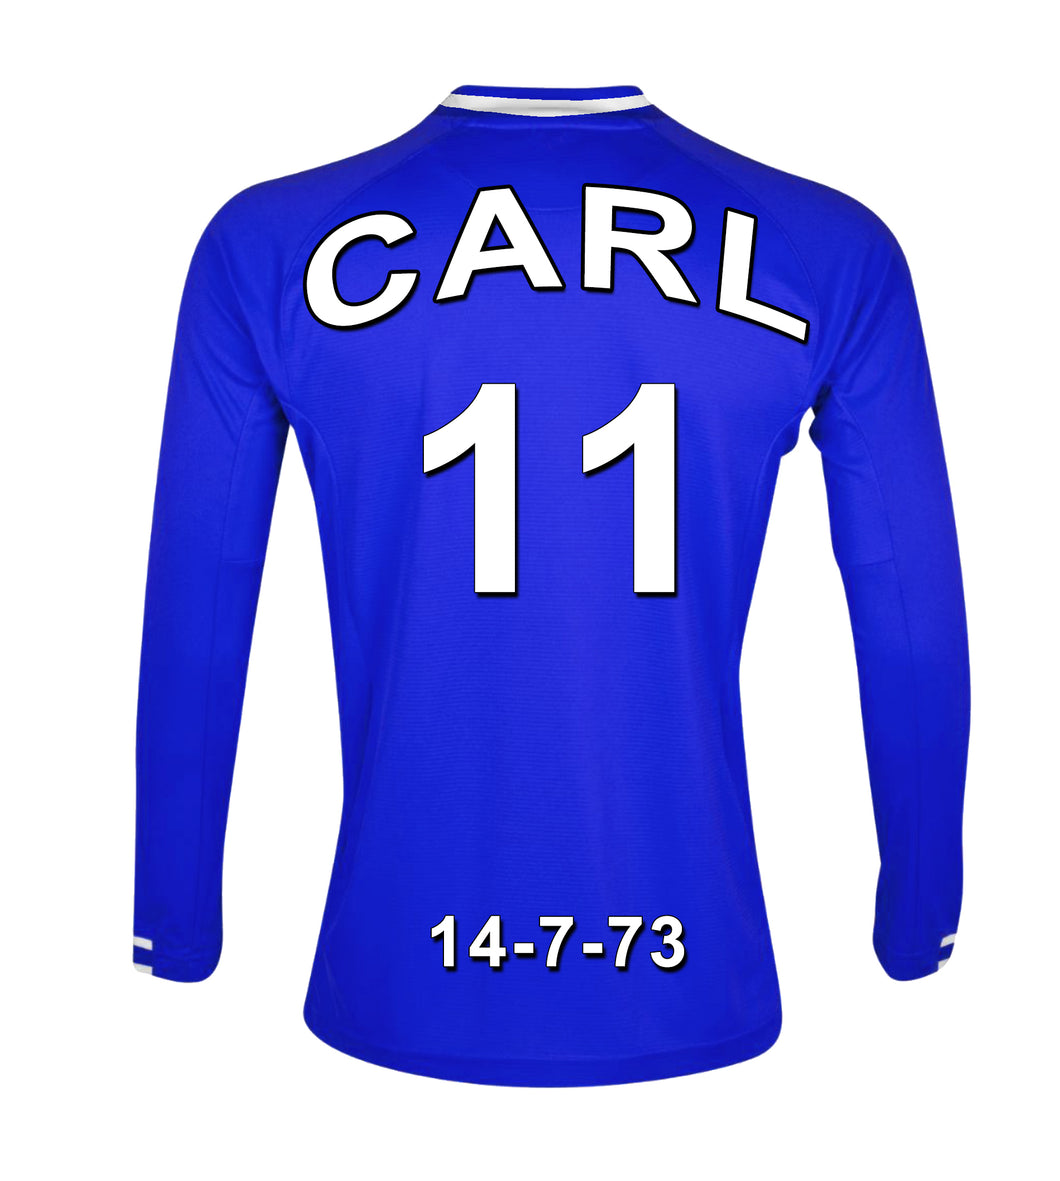 Chelsea blue and white  personalised football shirt canvas